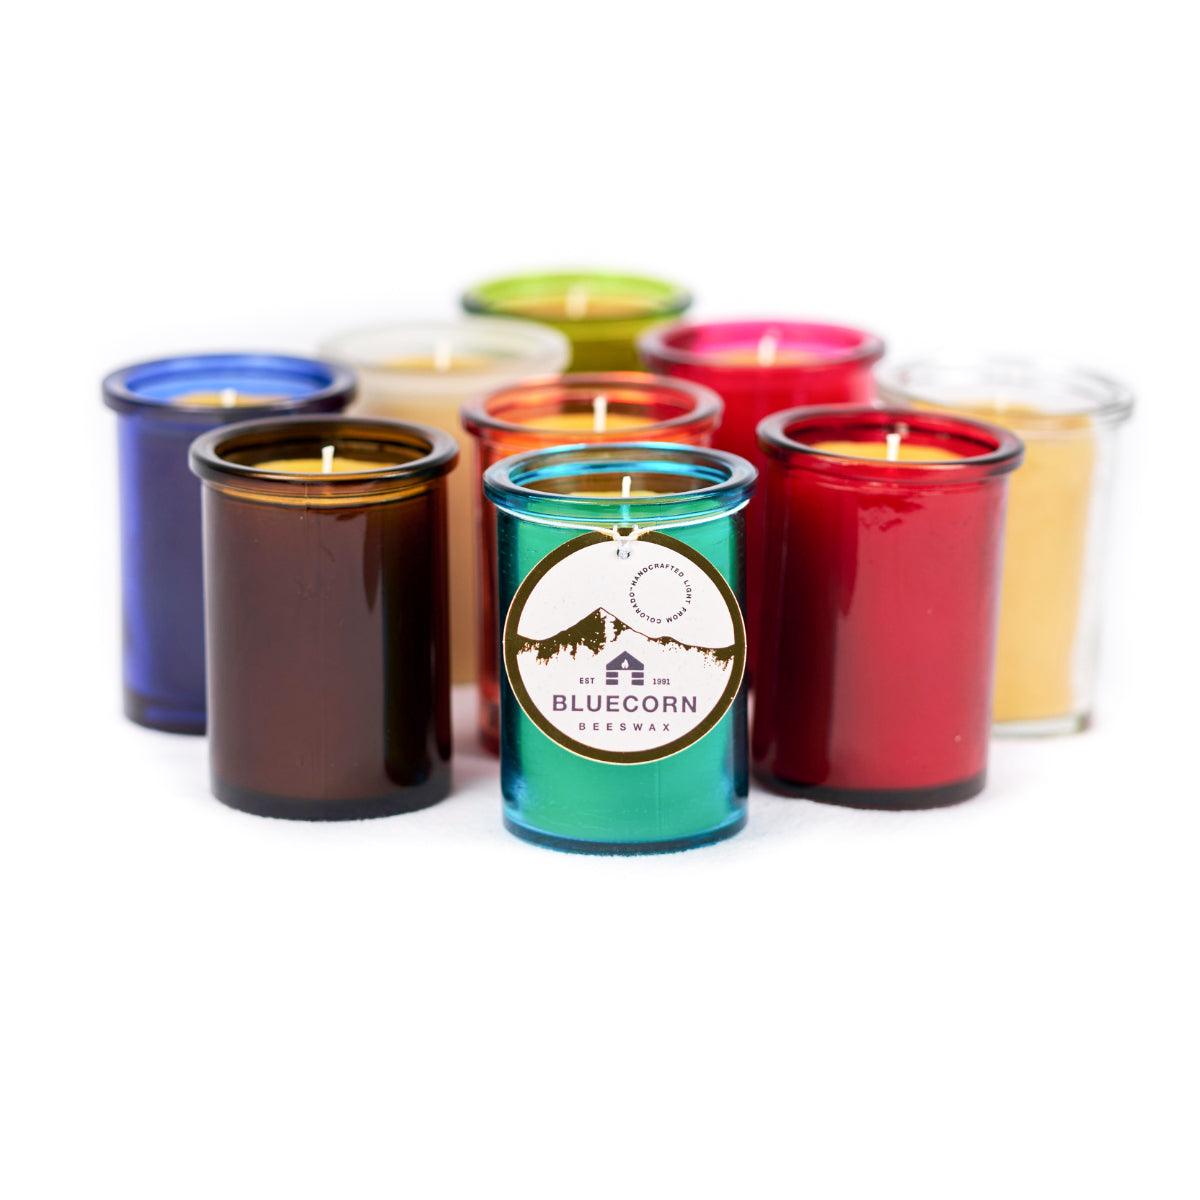 Group of Bluecorn Beeswax 6oz glass candles with Bluecorn hand tag featuring name, logo, and outline of mountains in gold foil. Colors include; Aqua, Red, Clear Fuchsia, Orange, Lime, Frosted, Cobalt, and Dark Amber. Wax is golden color. 